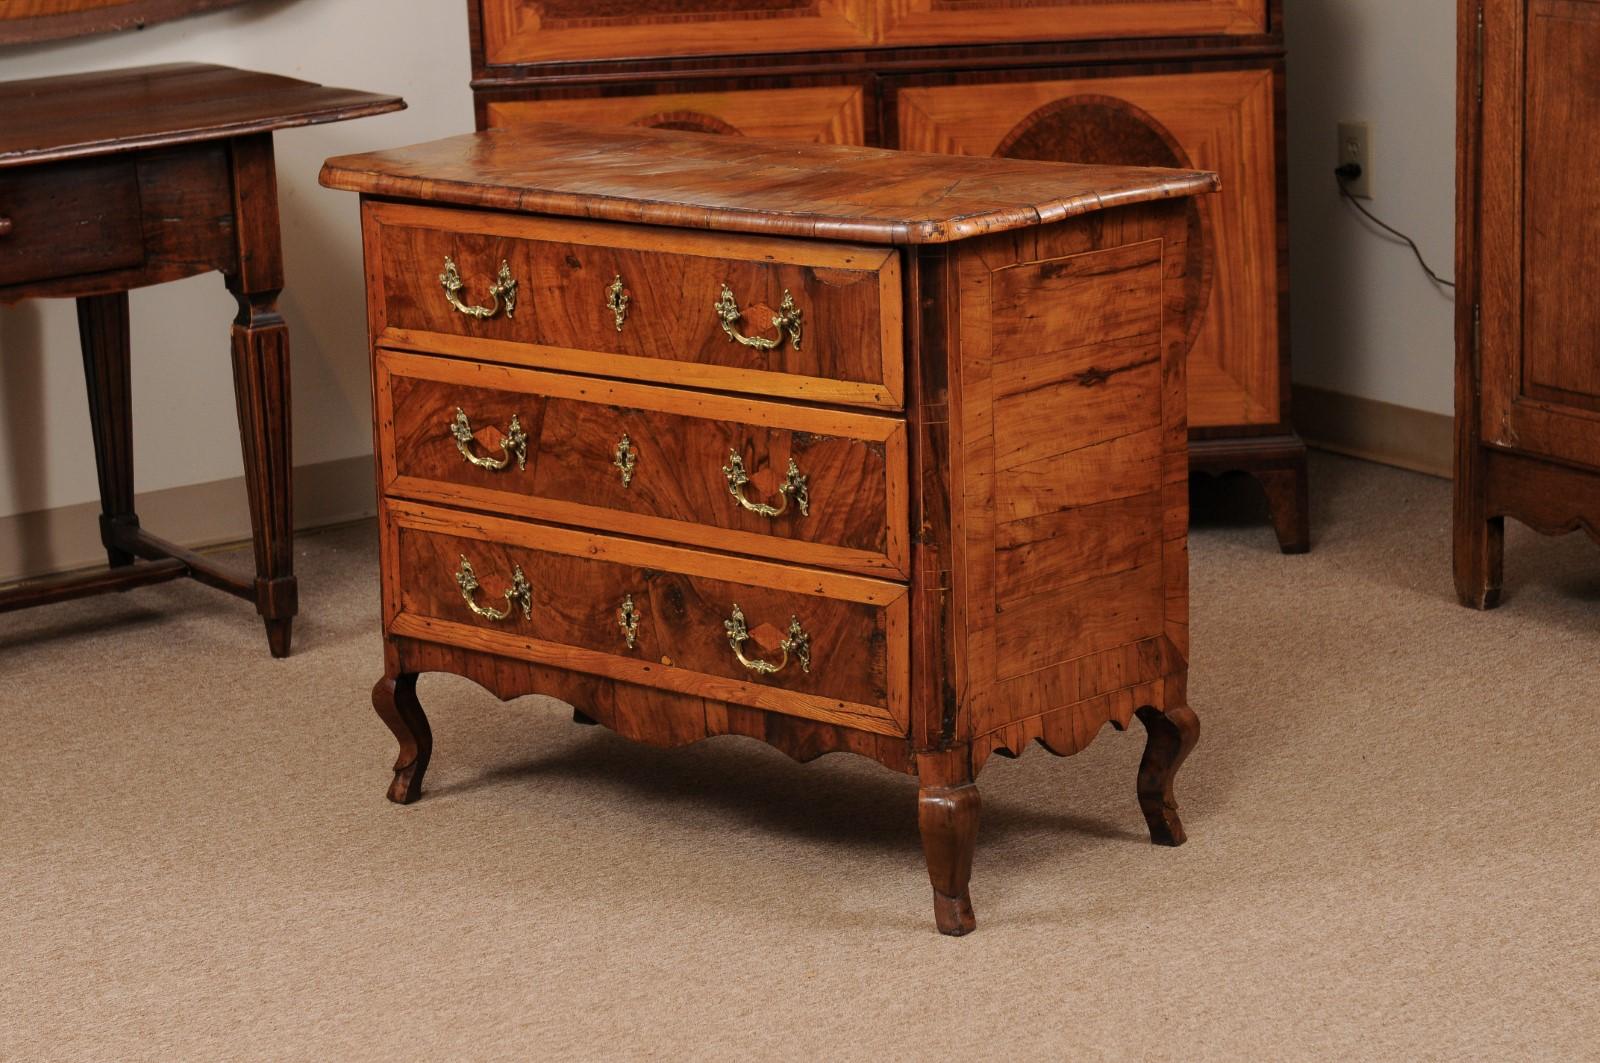 18th Century Italian 3-Drawer Commode in Olivewood with Cabriole Legs For Sale 10